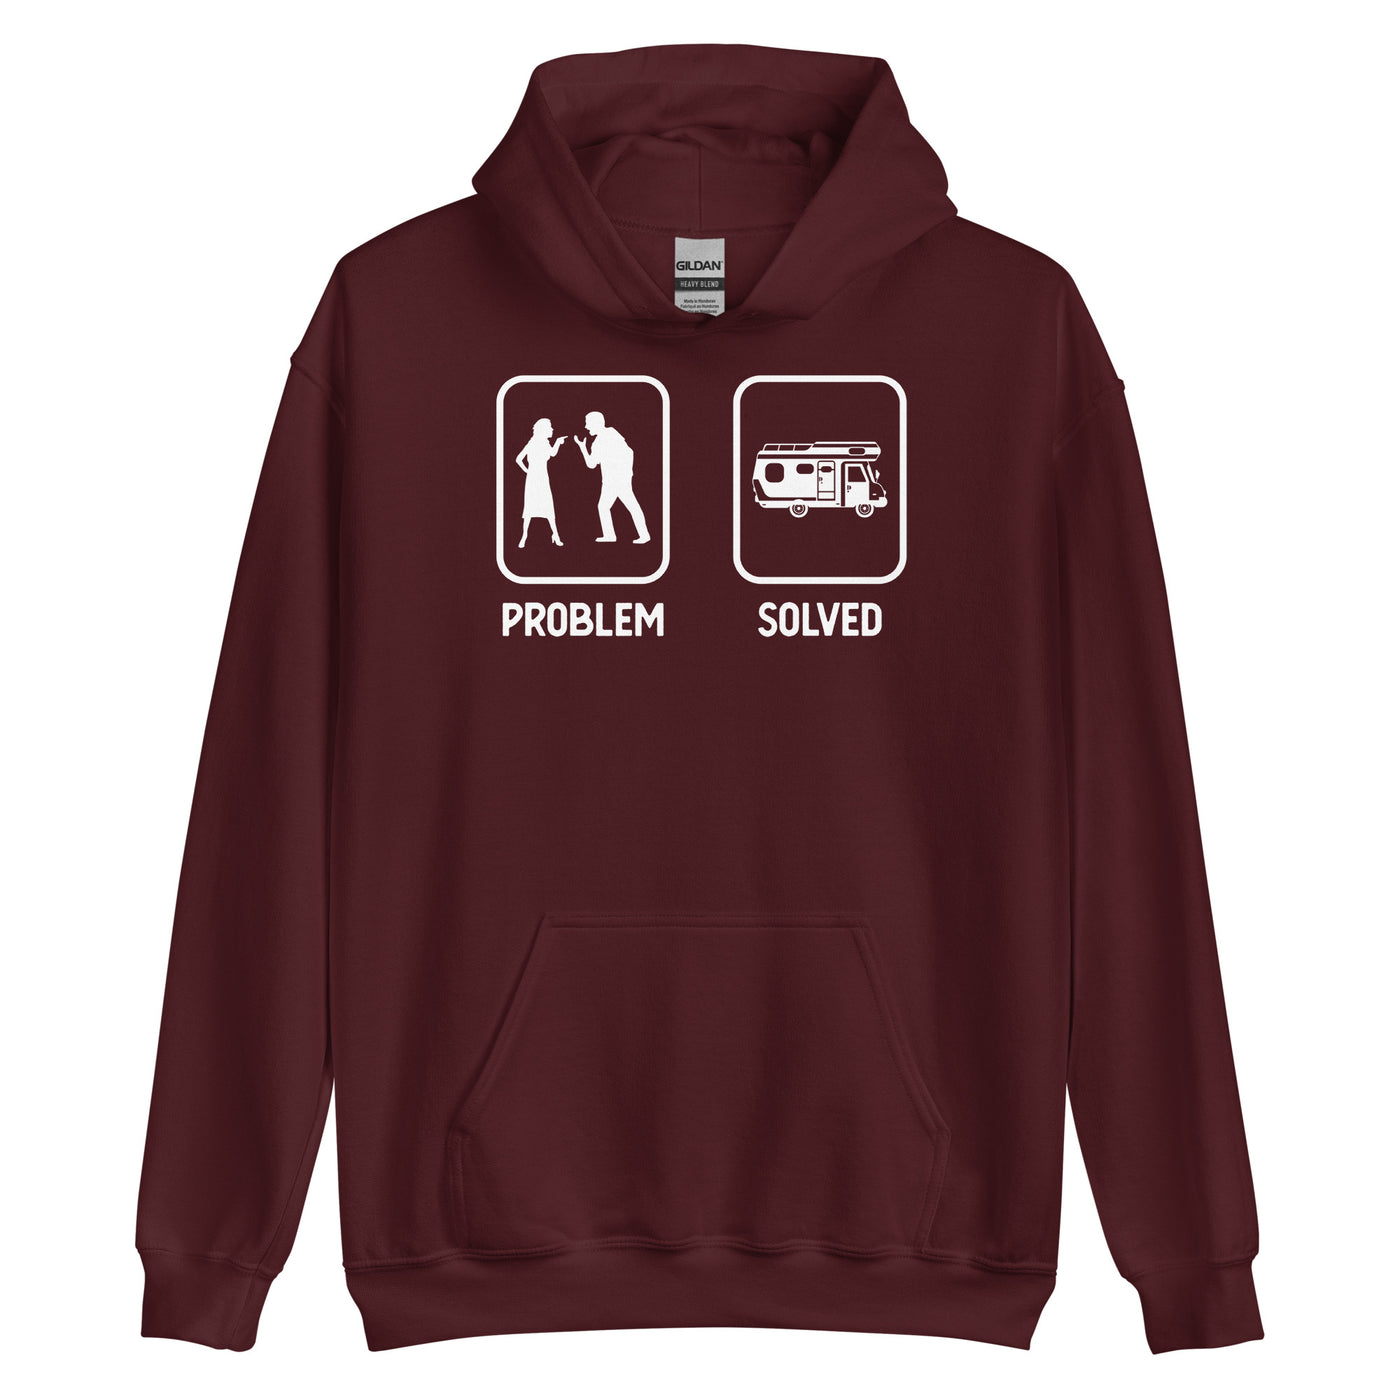 Problem Solved - Camping Van - Unisex Hoodie camping xxx yyy zzz Maroon